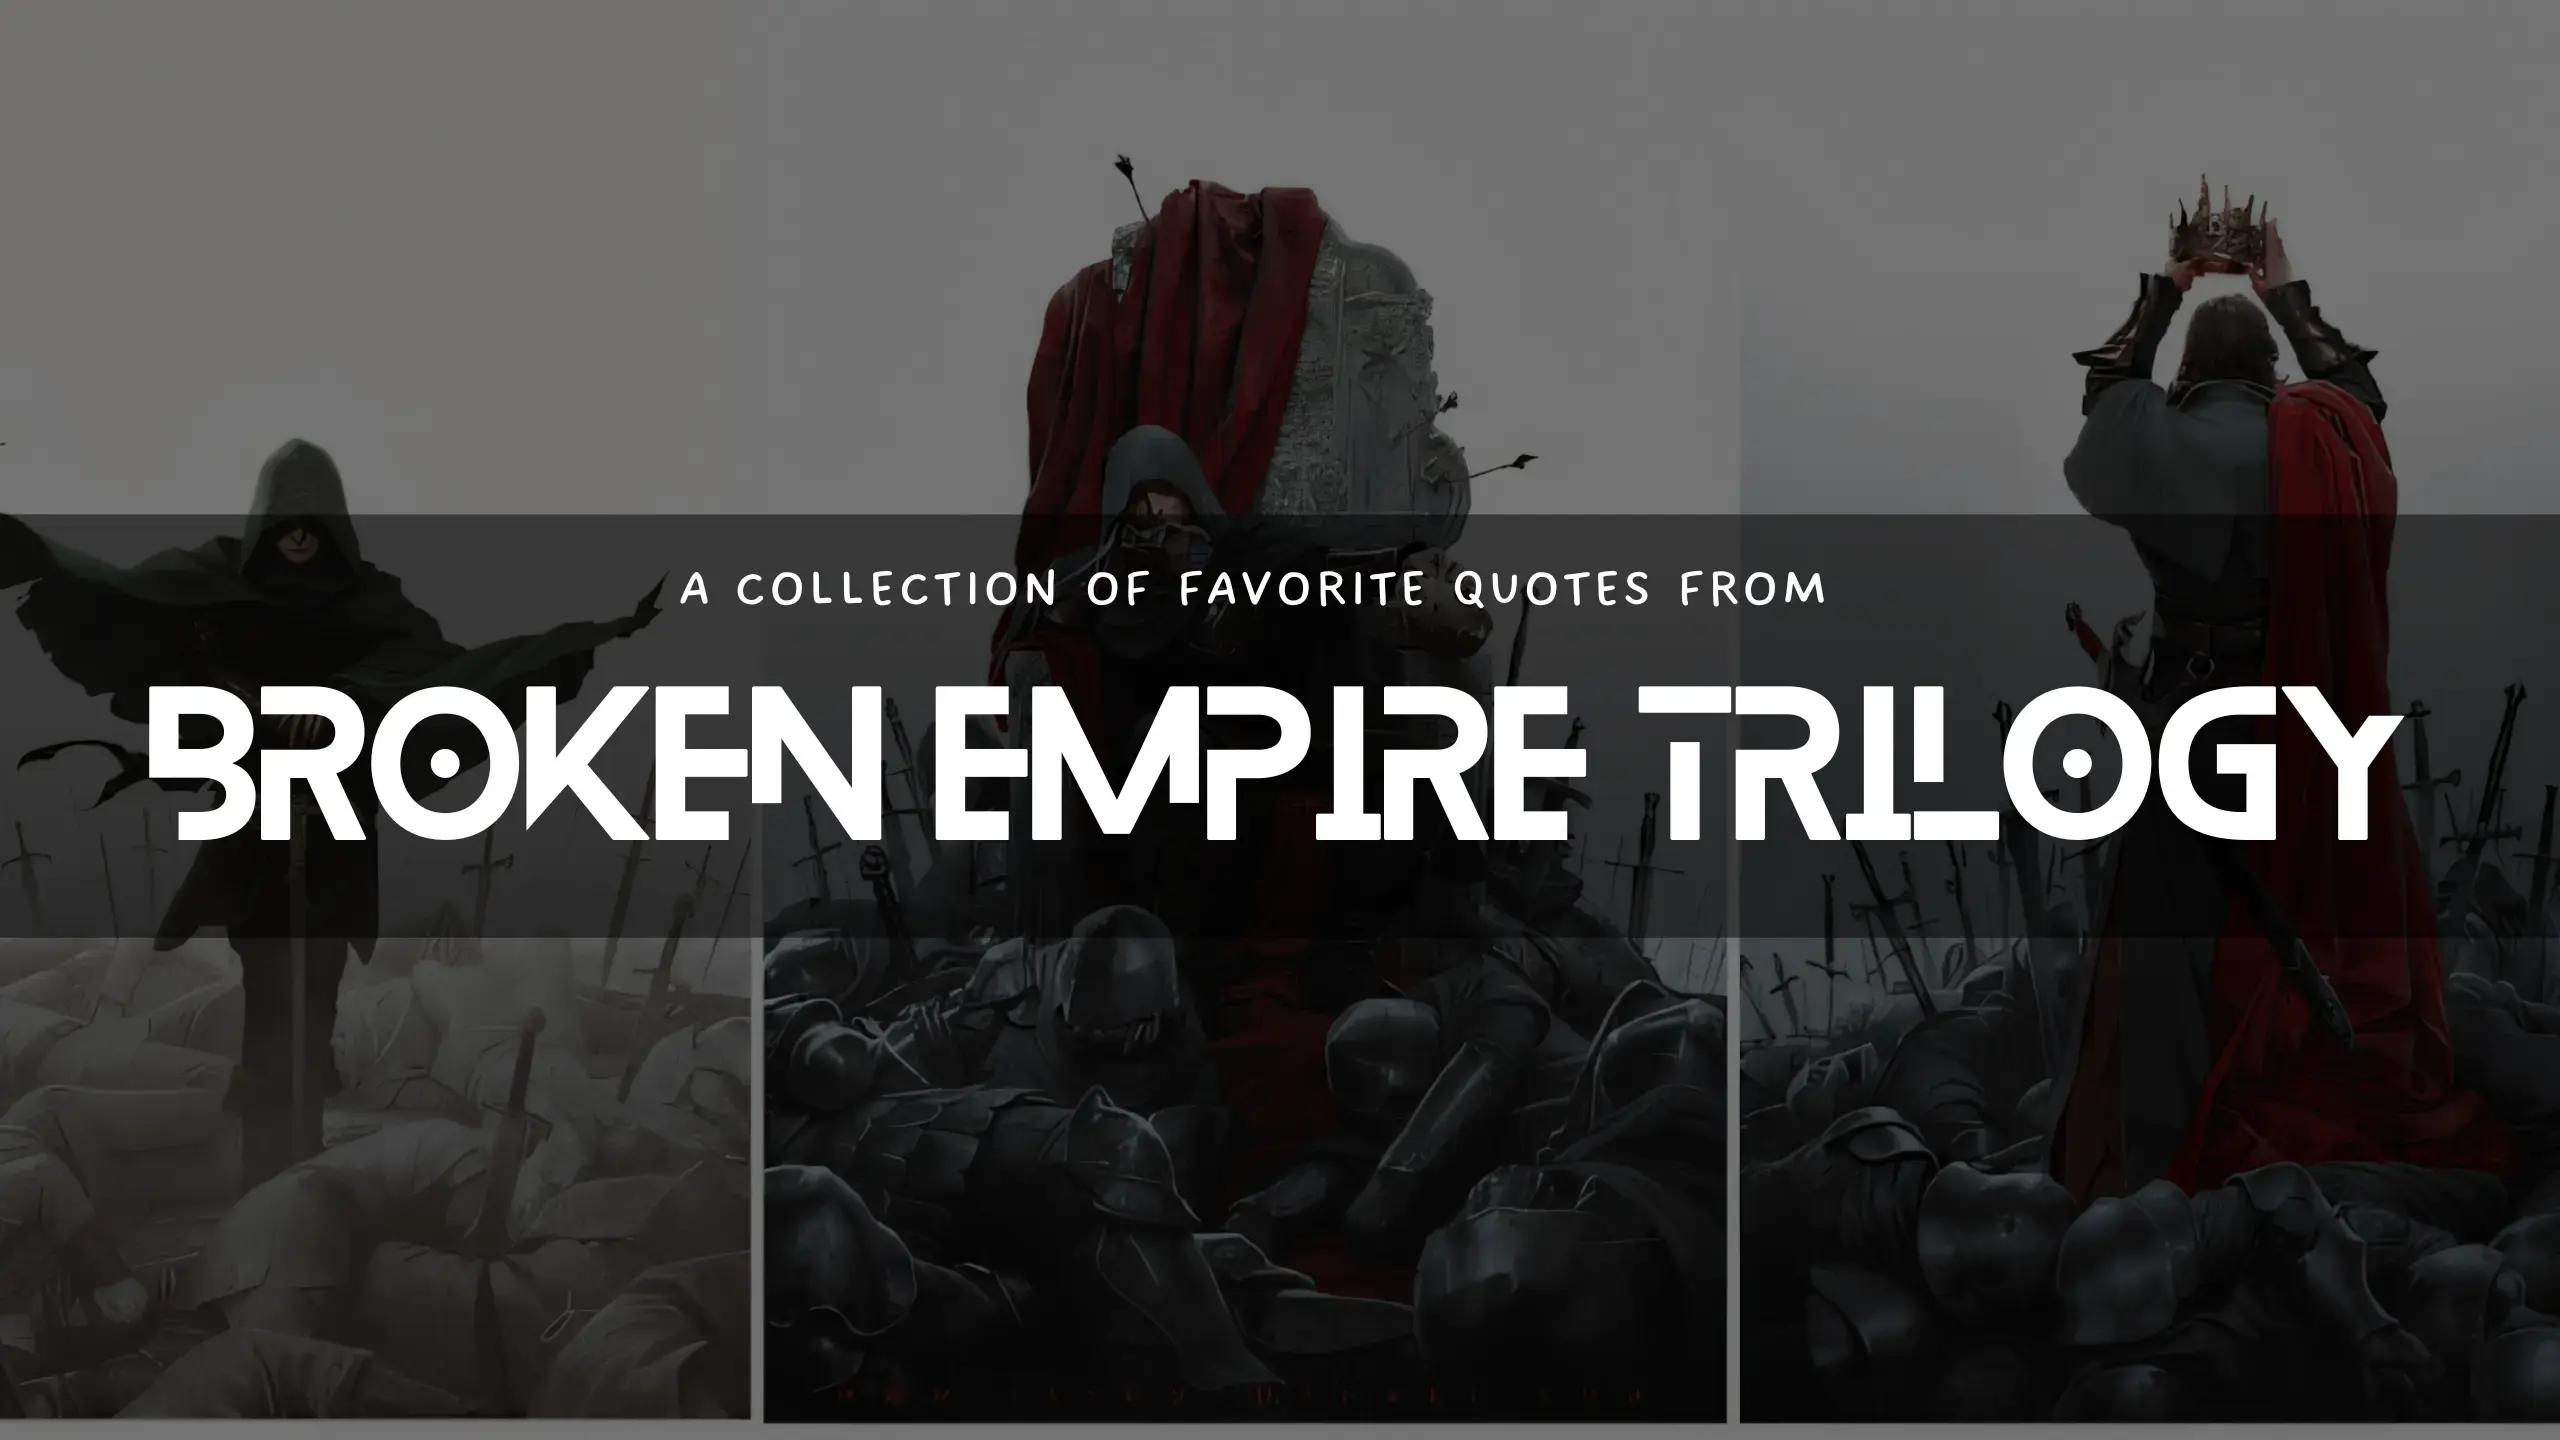 Broken Empire Trilogy by Mark Lawrence